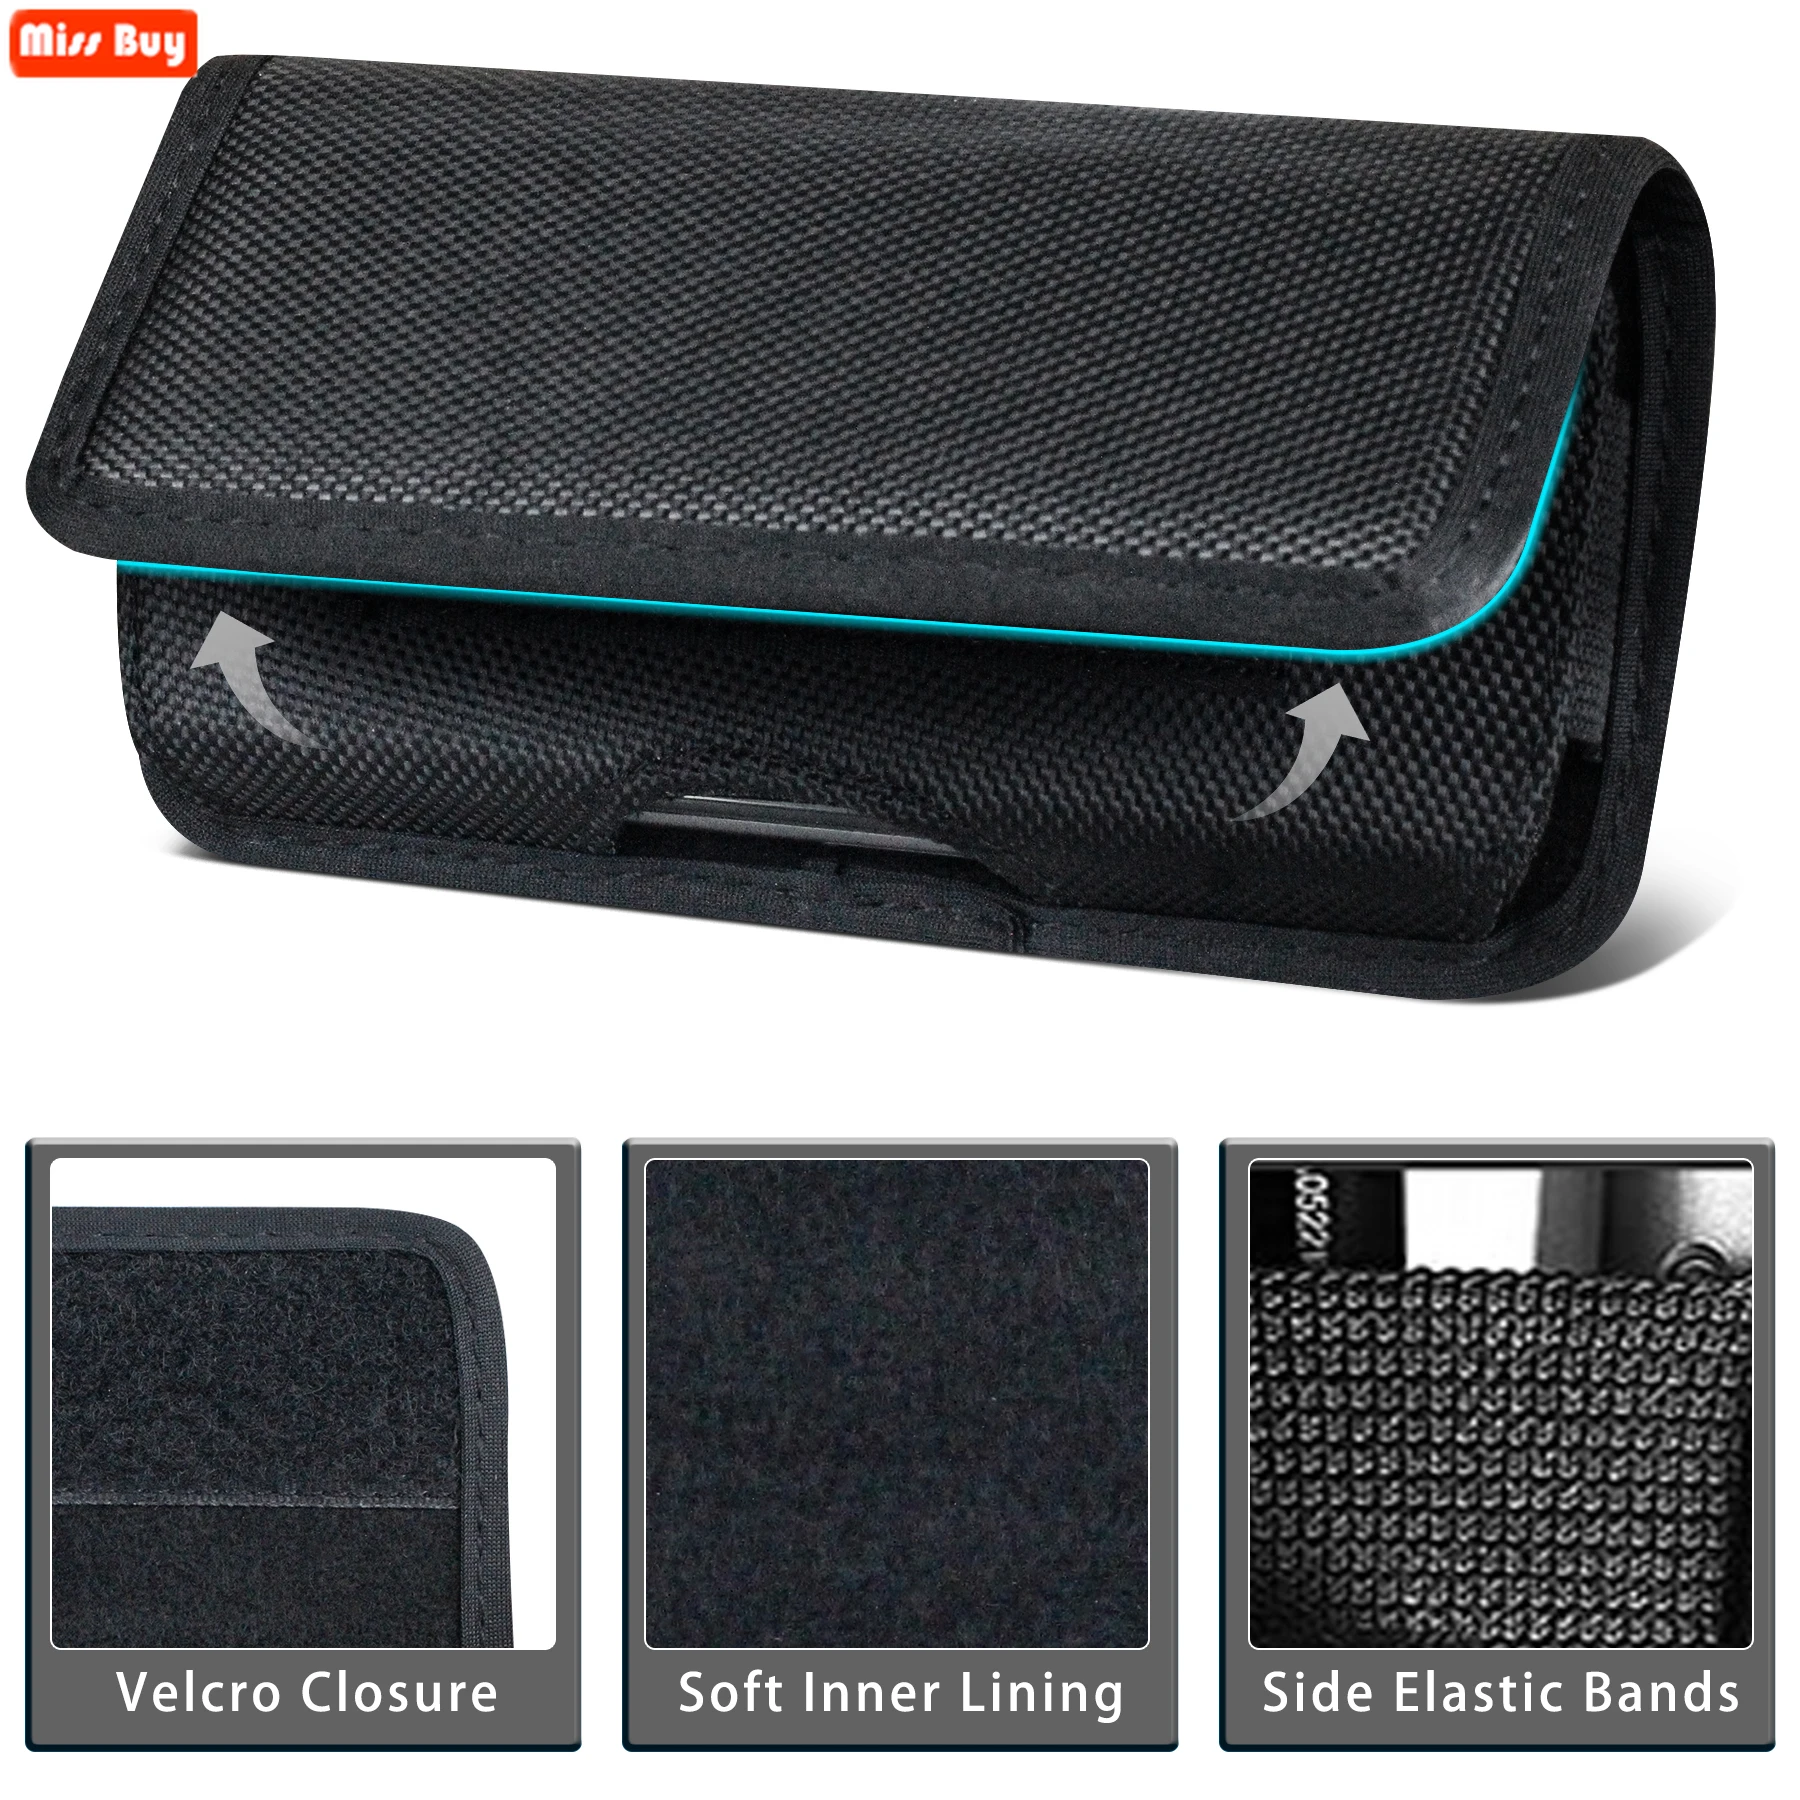 Phone Pouch For Samsung galaxy S21 S22 Ultra S20 Plus S10 Lite S9 Plus S8 S7 S6 S5 S4 S3 Waist Case Belt Clip Oxford cloth Bag